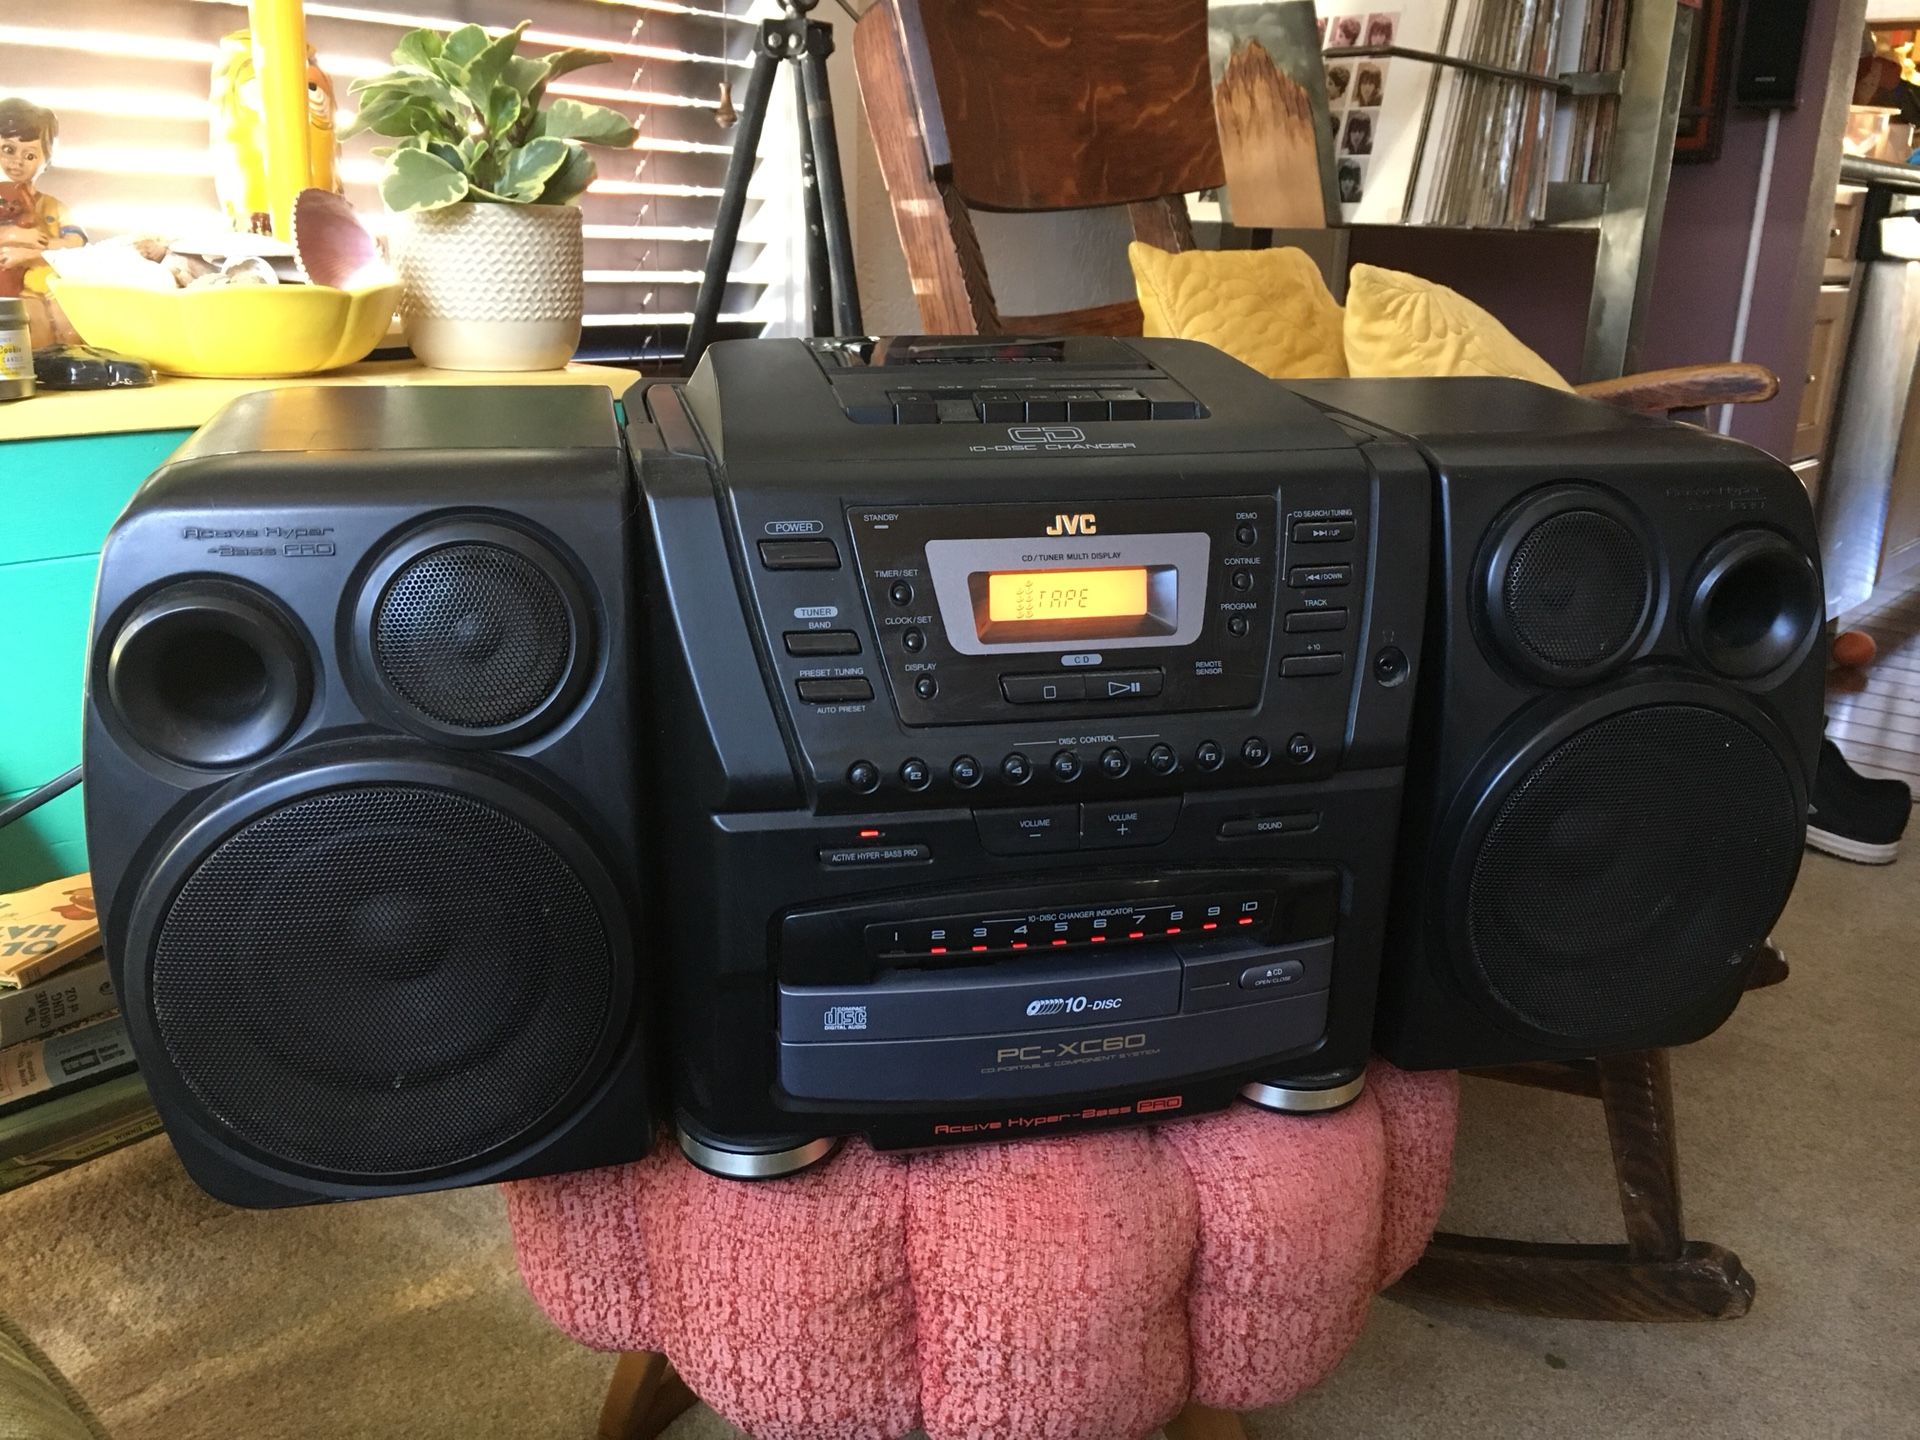 JVC PC-XC60 10 Compact Disc and Cassette Tape Player Boom Box